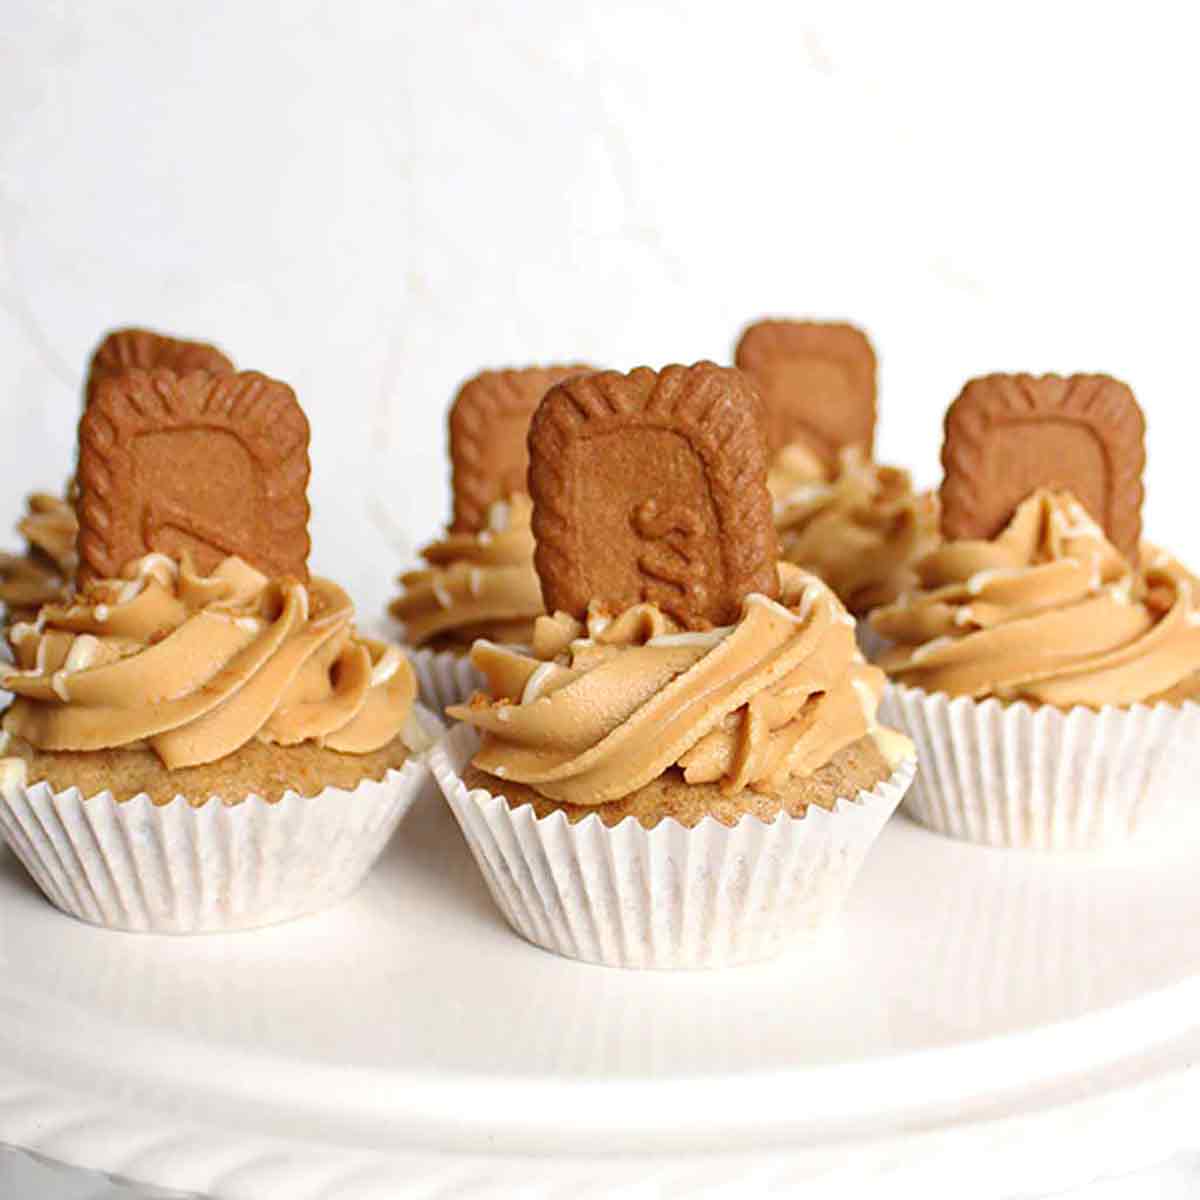 6 Vegan Biscoff Cupcakes On A White Cake Stand